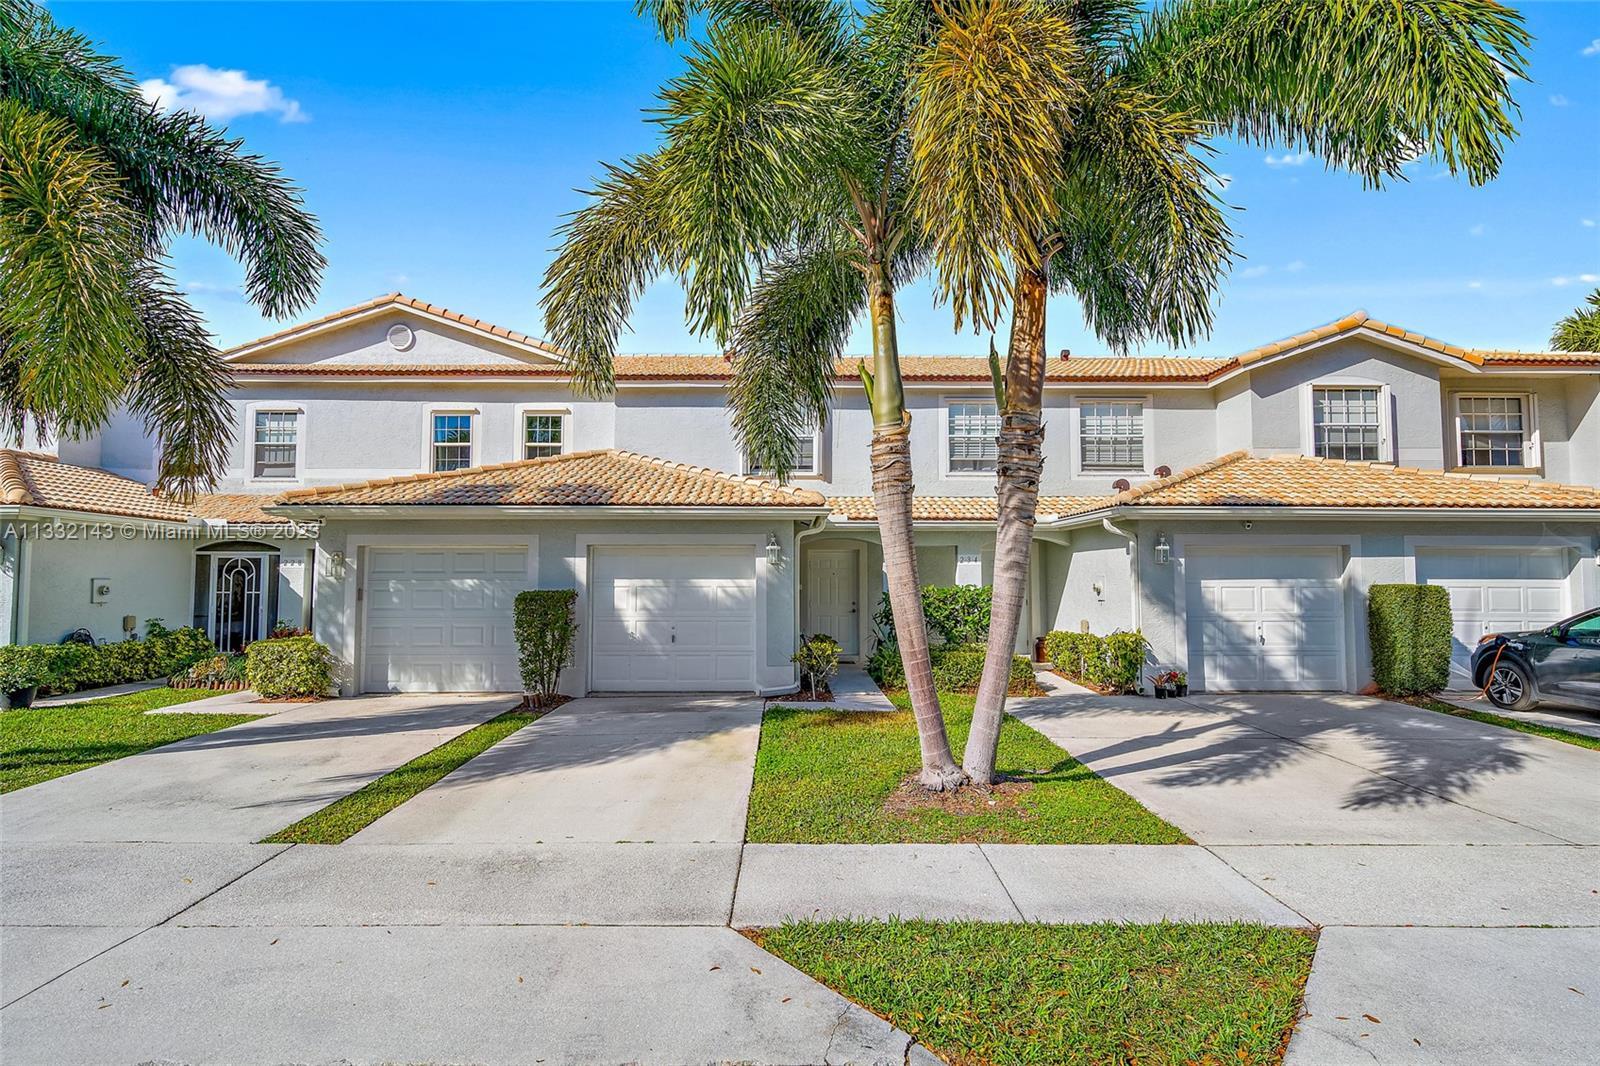 Amazing 2 Bedroom, 2.5 Bath townhome, perfectly located in the heart of Jupiter. Enjoy a community t